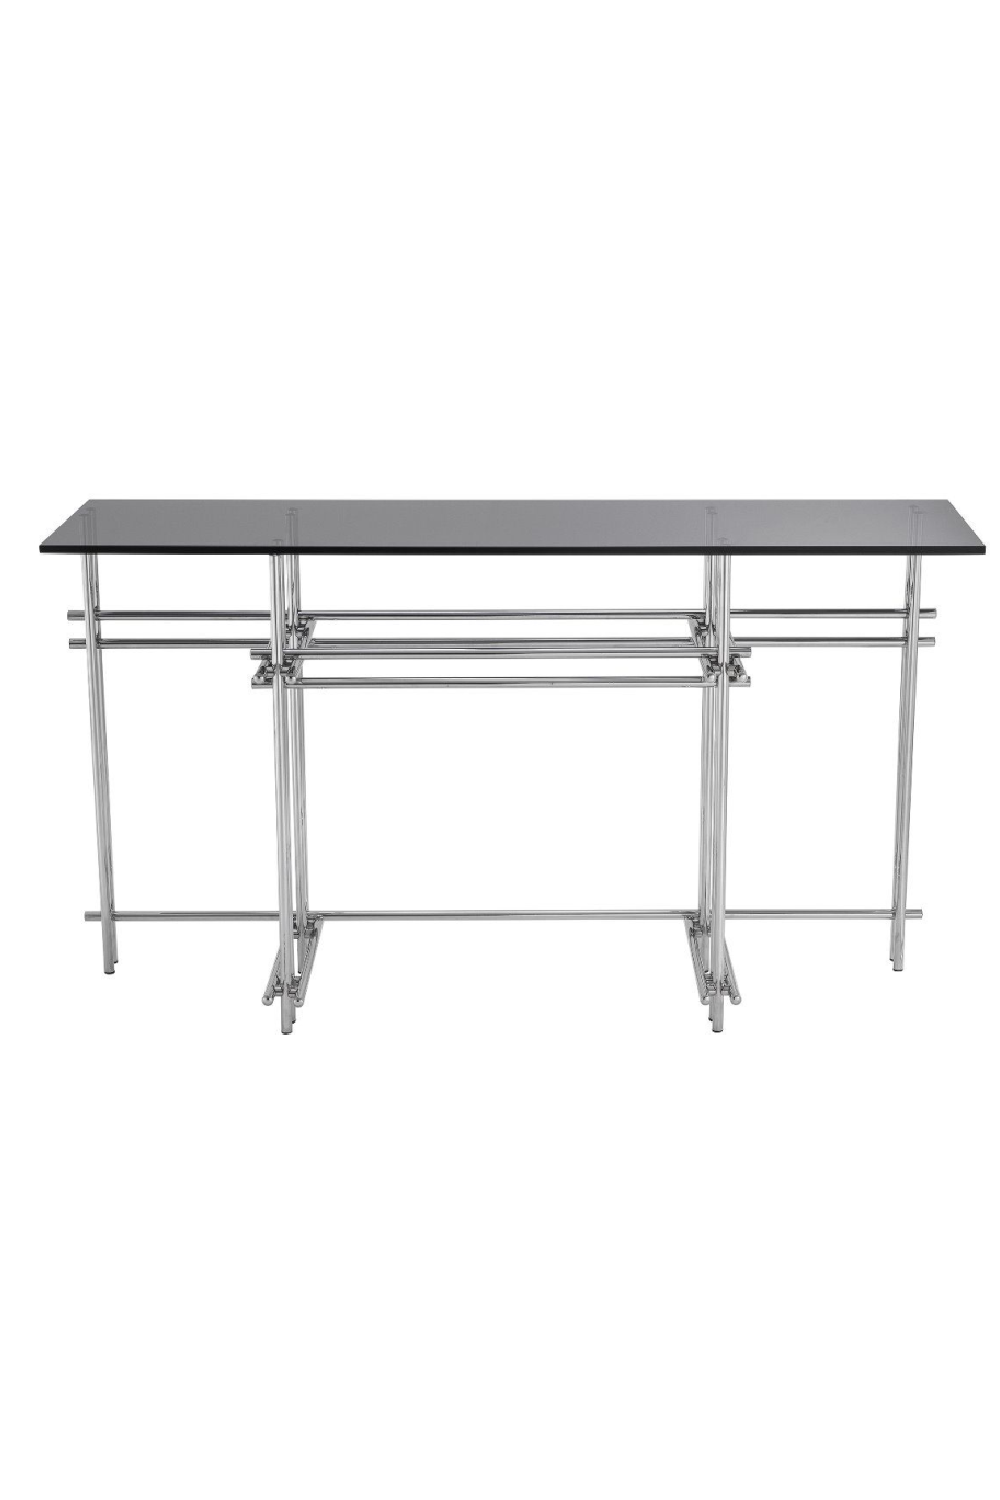 Smoked Glass Steel Console Table | Eichholtz Quinn | Oroa.com